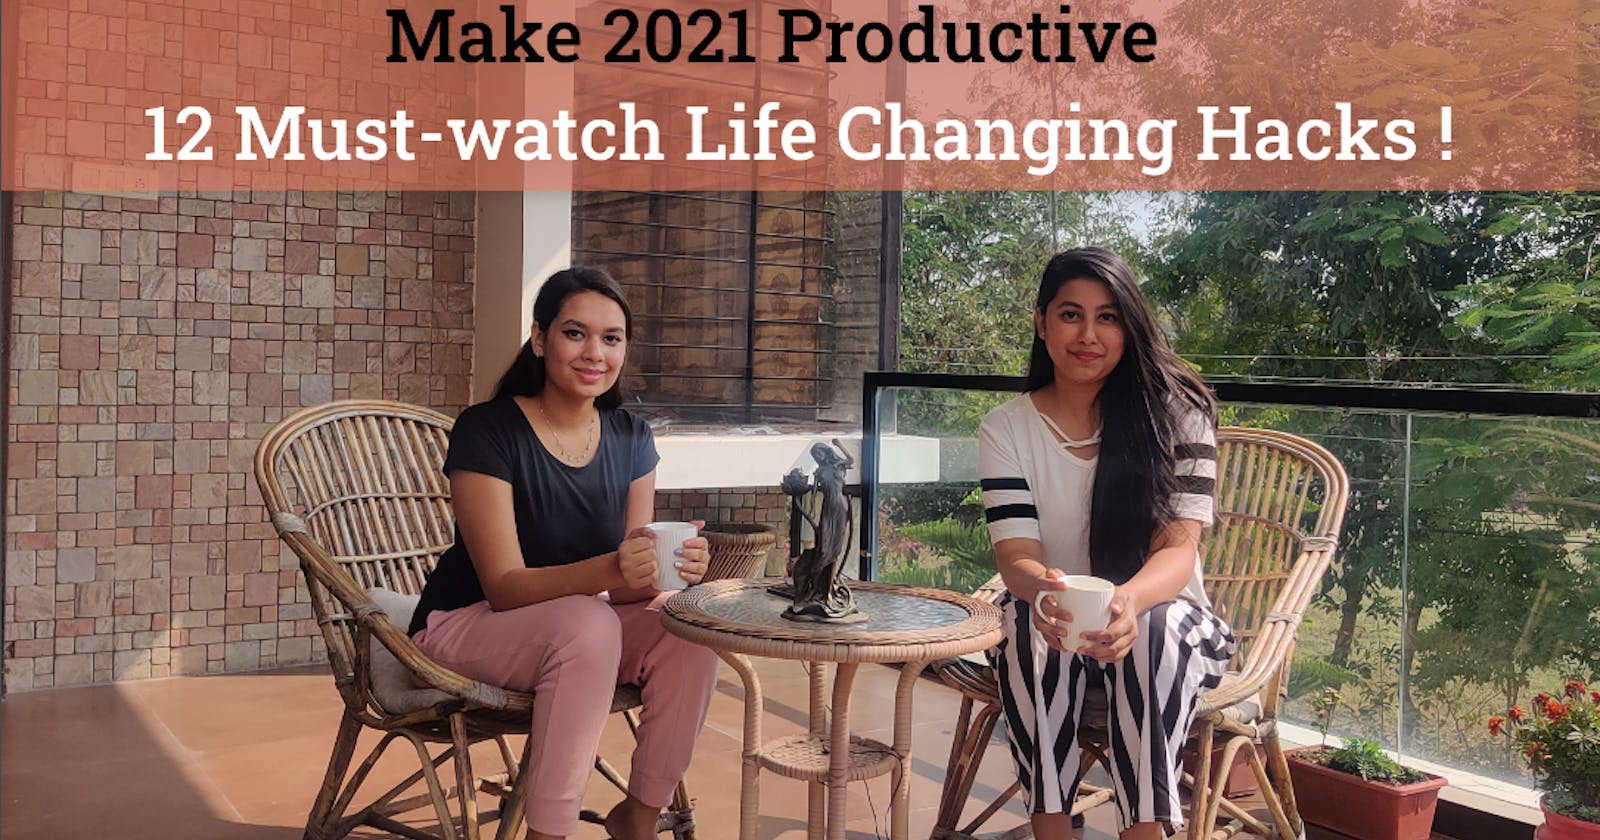 Make 2021 a Productive Year | 12 Must-watch Life-Changing Hacks!